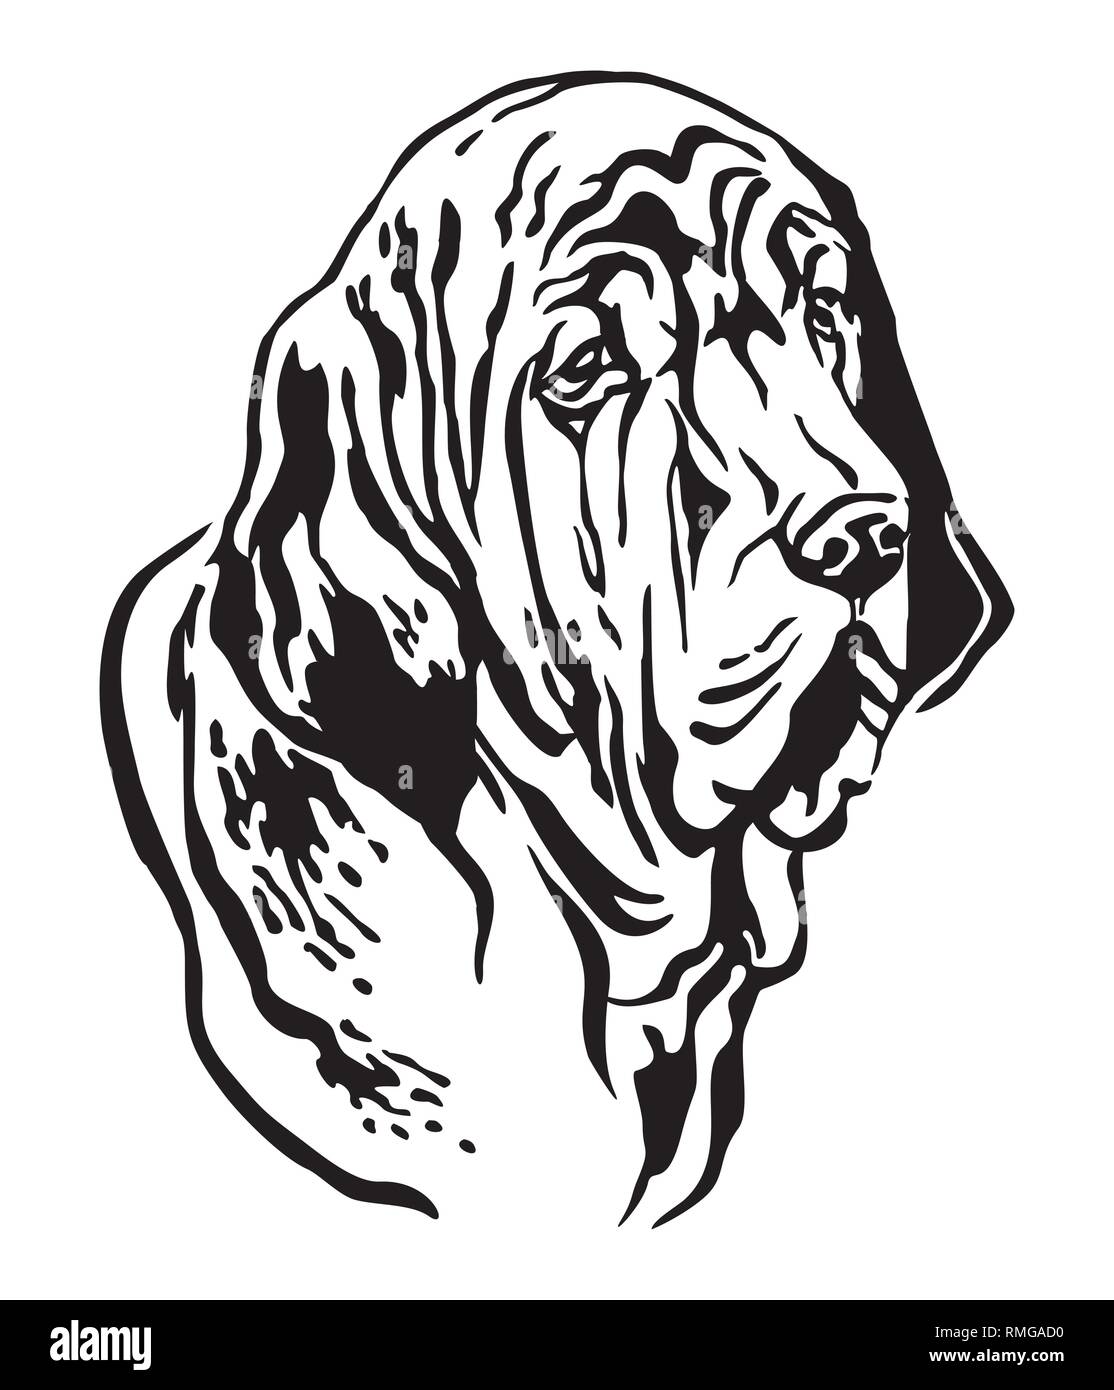 https://c8.alamy.com/comp/RMGAD0/decorative-outline-portrait-of-fila-brasileiro-dog-looking-in-profile-vector-illustration-in-black-color-isolated-on-white-background-image-for-desi-RMGAD0.jpg